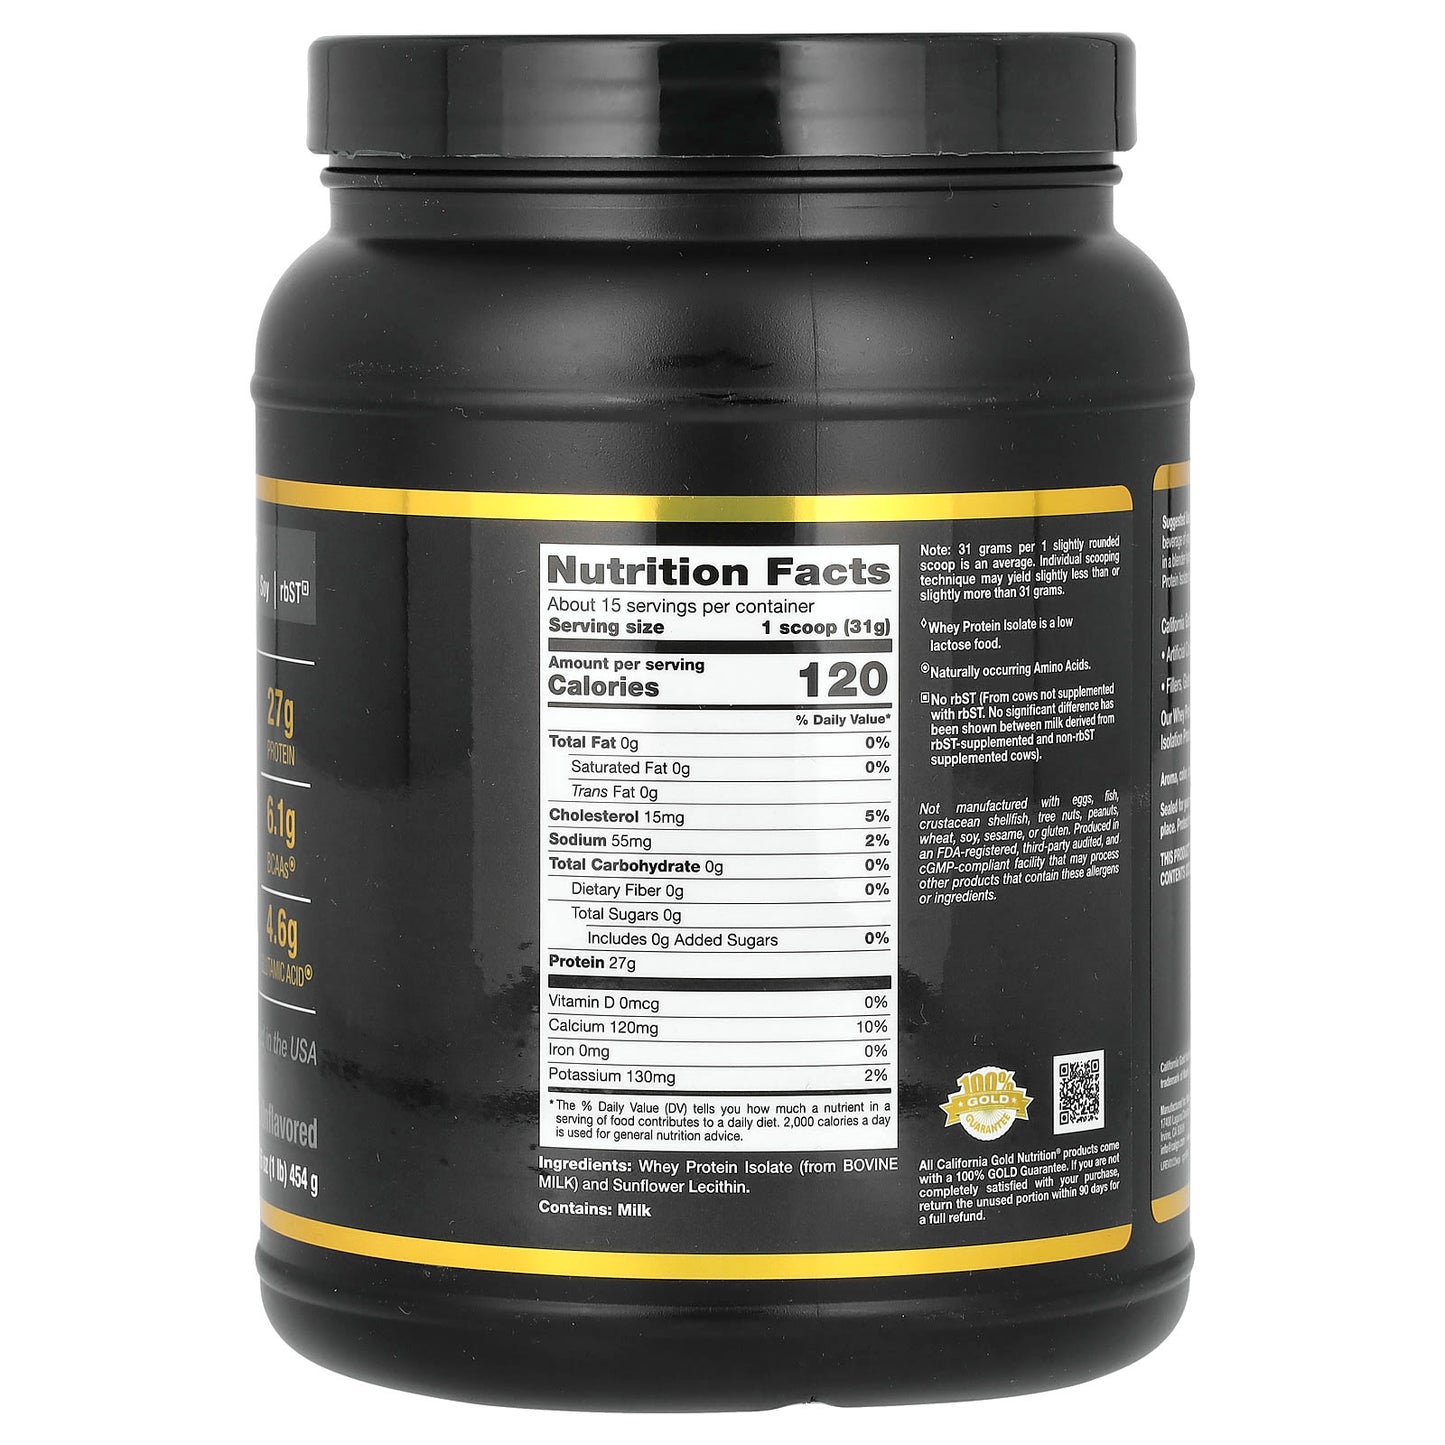 California Gold Nutrition, SPORT - Whey Protein Isolate, Unflavored, 1 lb, 16 oz (454 g)